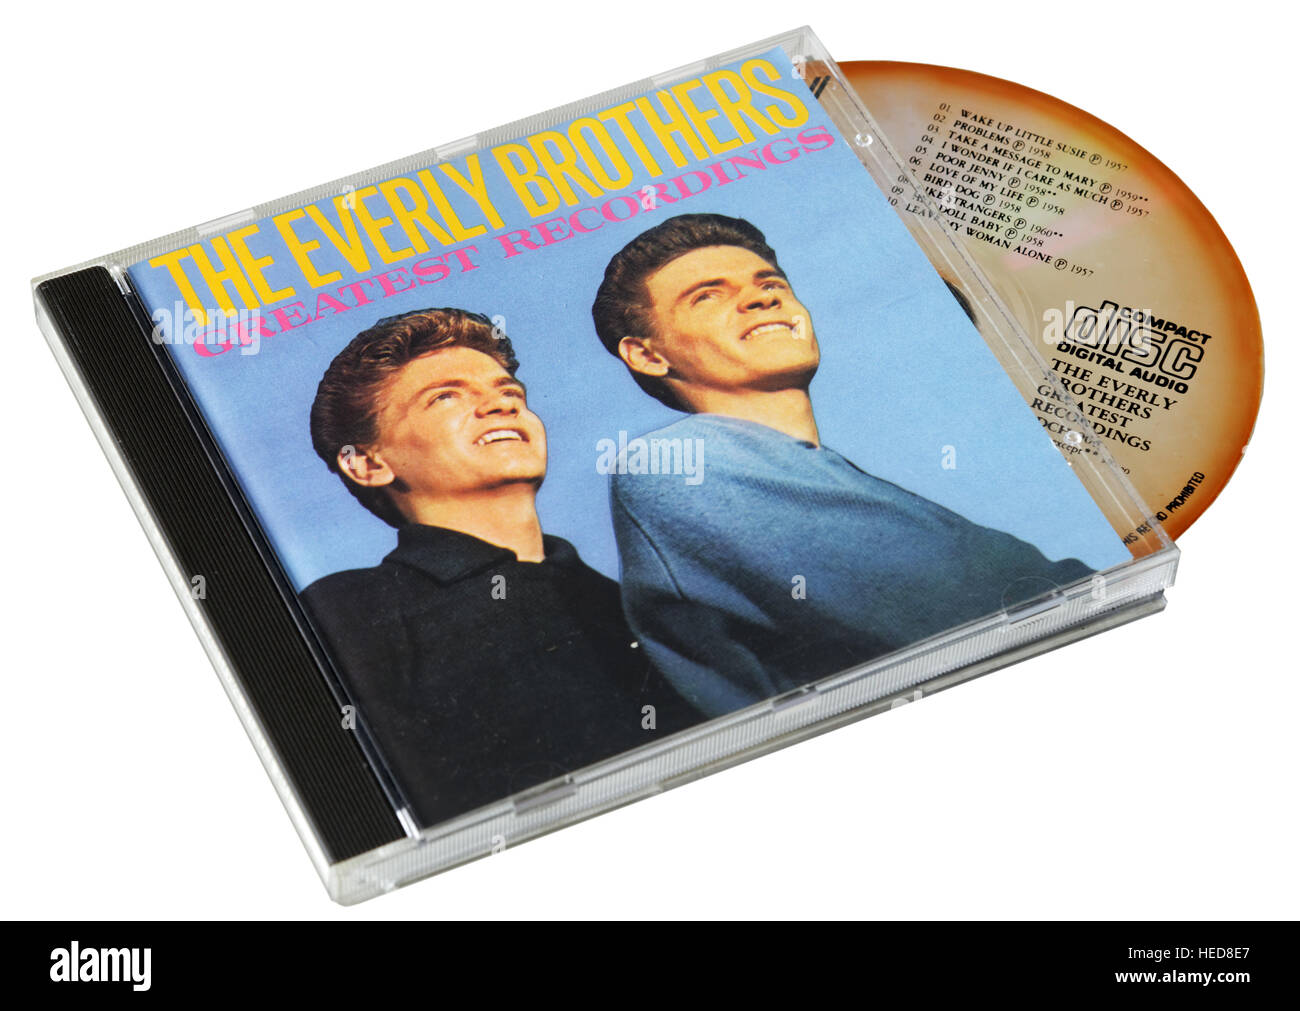 The Everly Brothers Greatest Recording CD Stock Photo